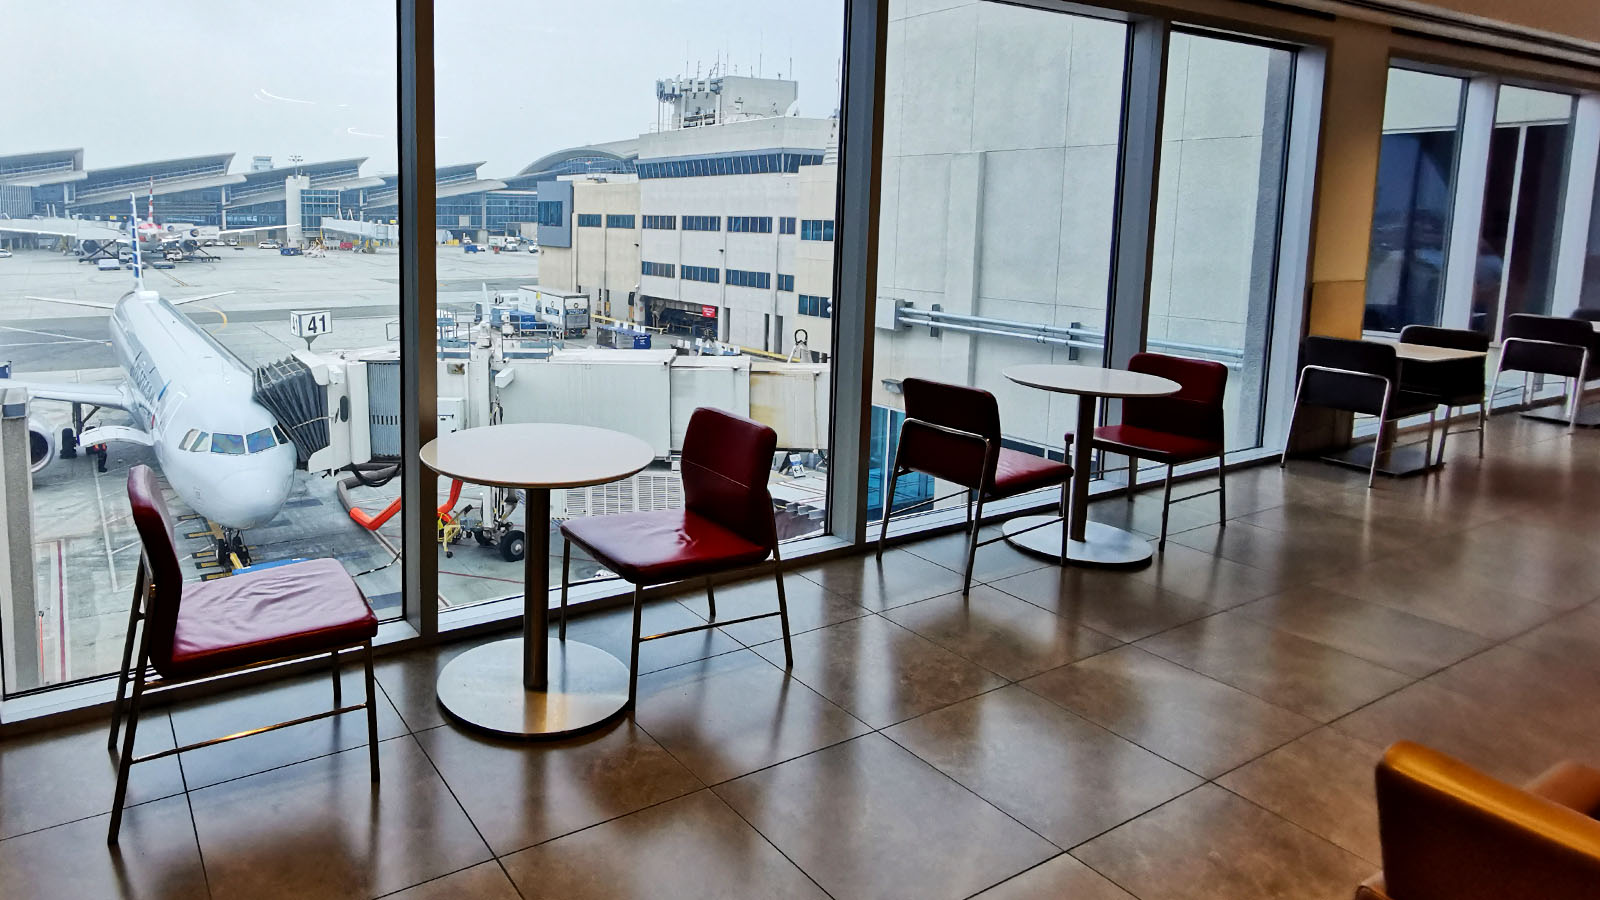 Sit and enjoy the view in the American Airlines Flagship Lounge, Los Angeles